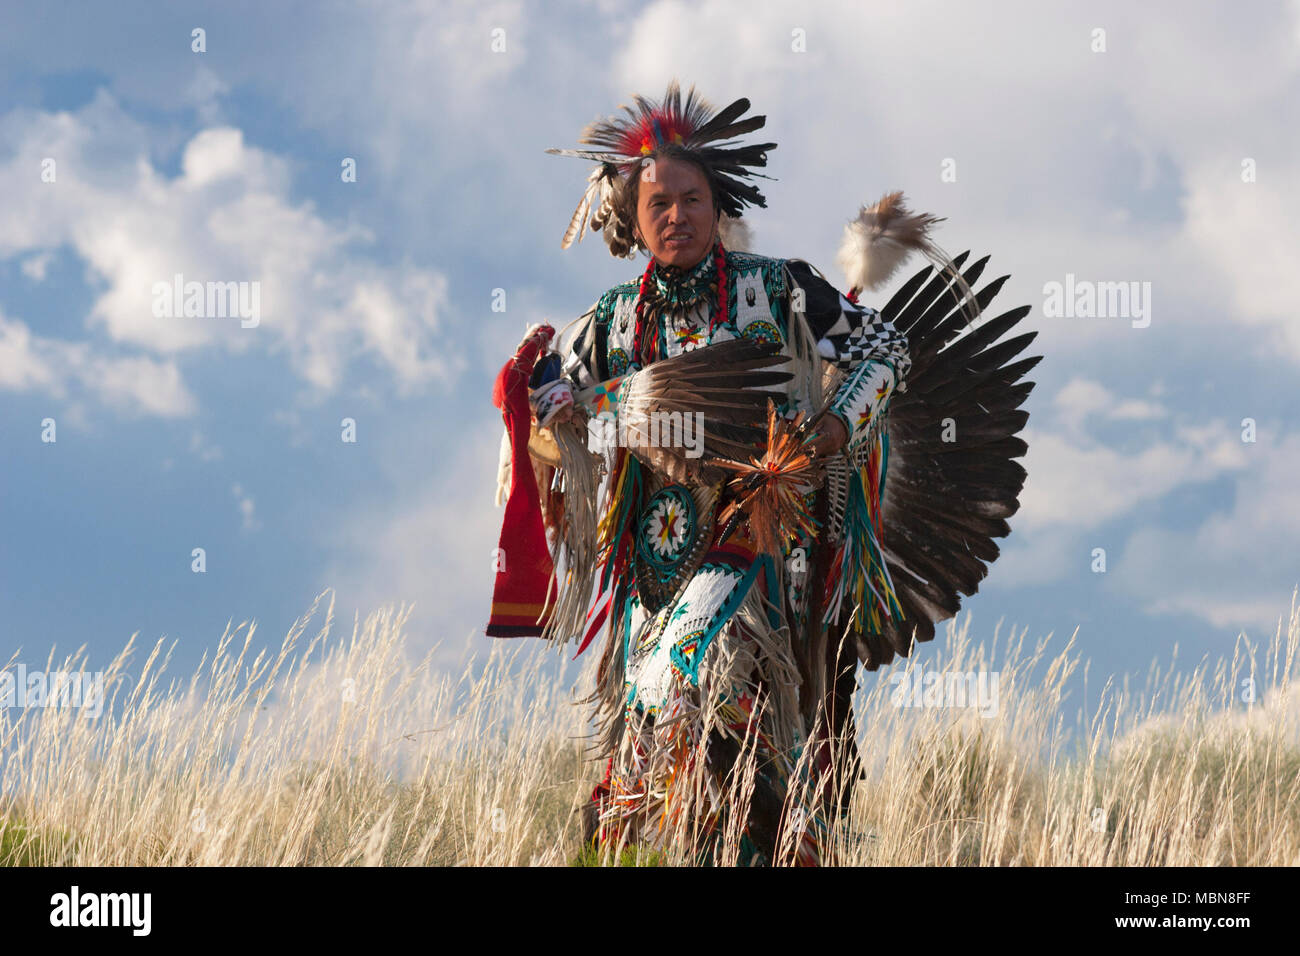 Cheyenne Indians High Resolution Stock Photography and Images - Alamy